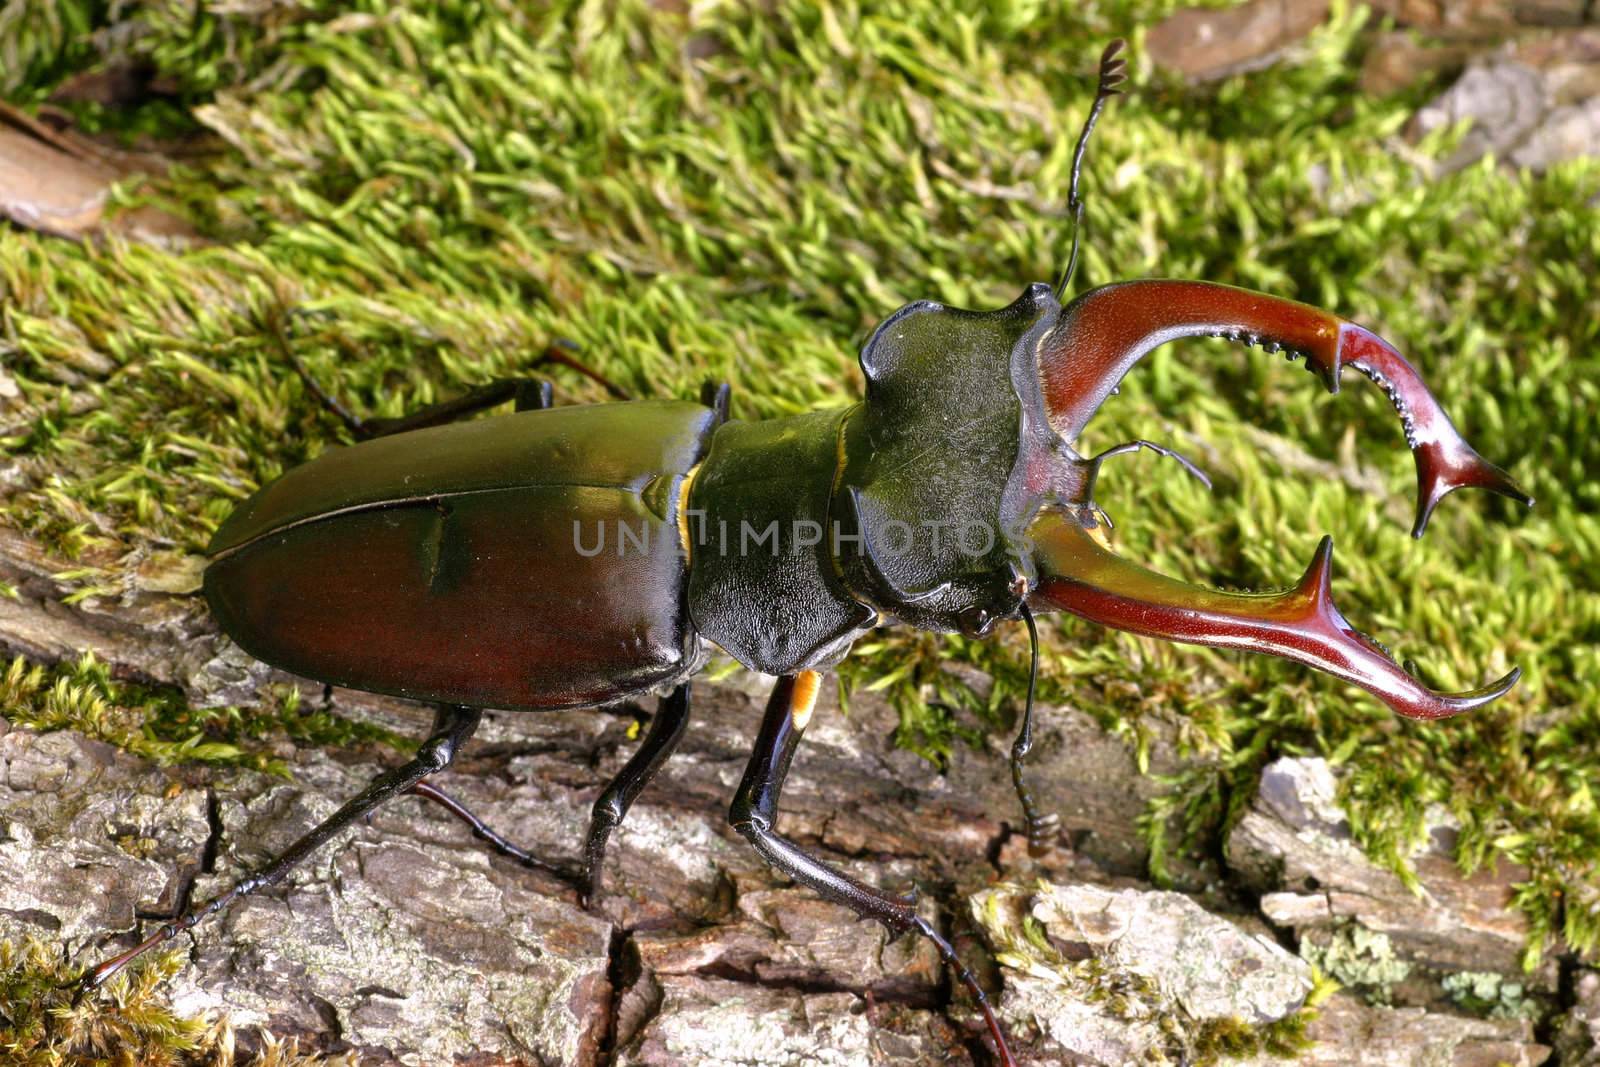 Stag beetle by camerziga